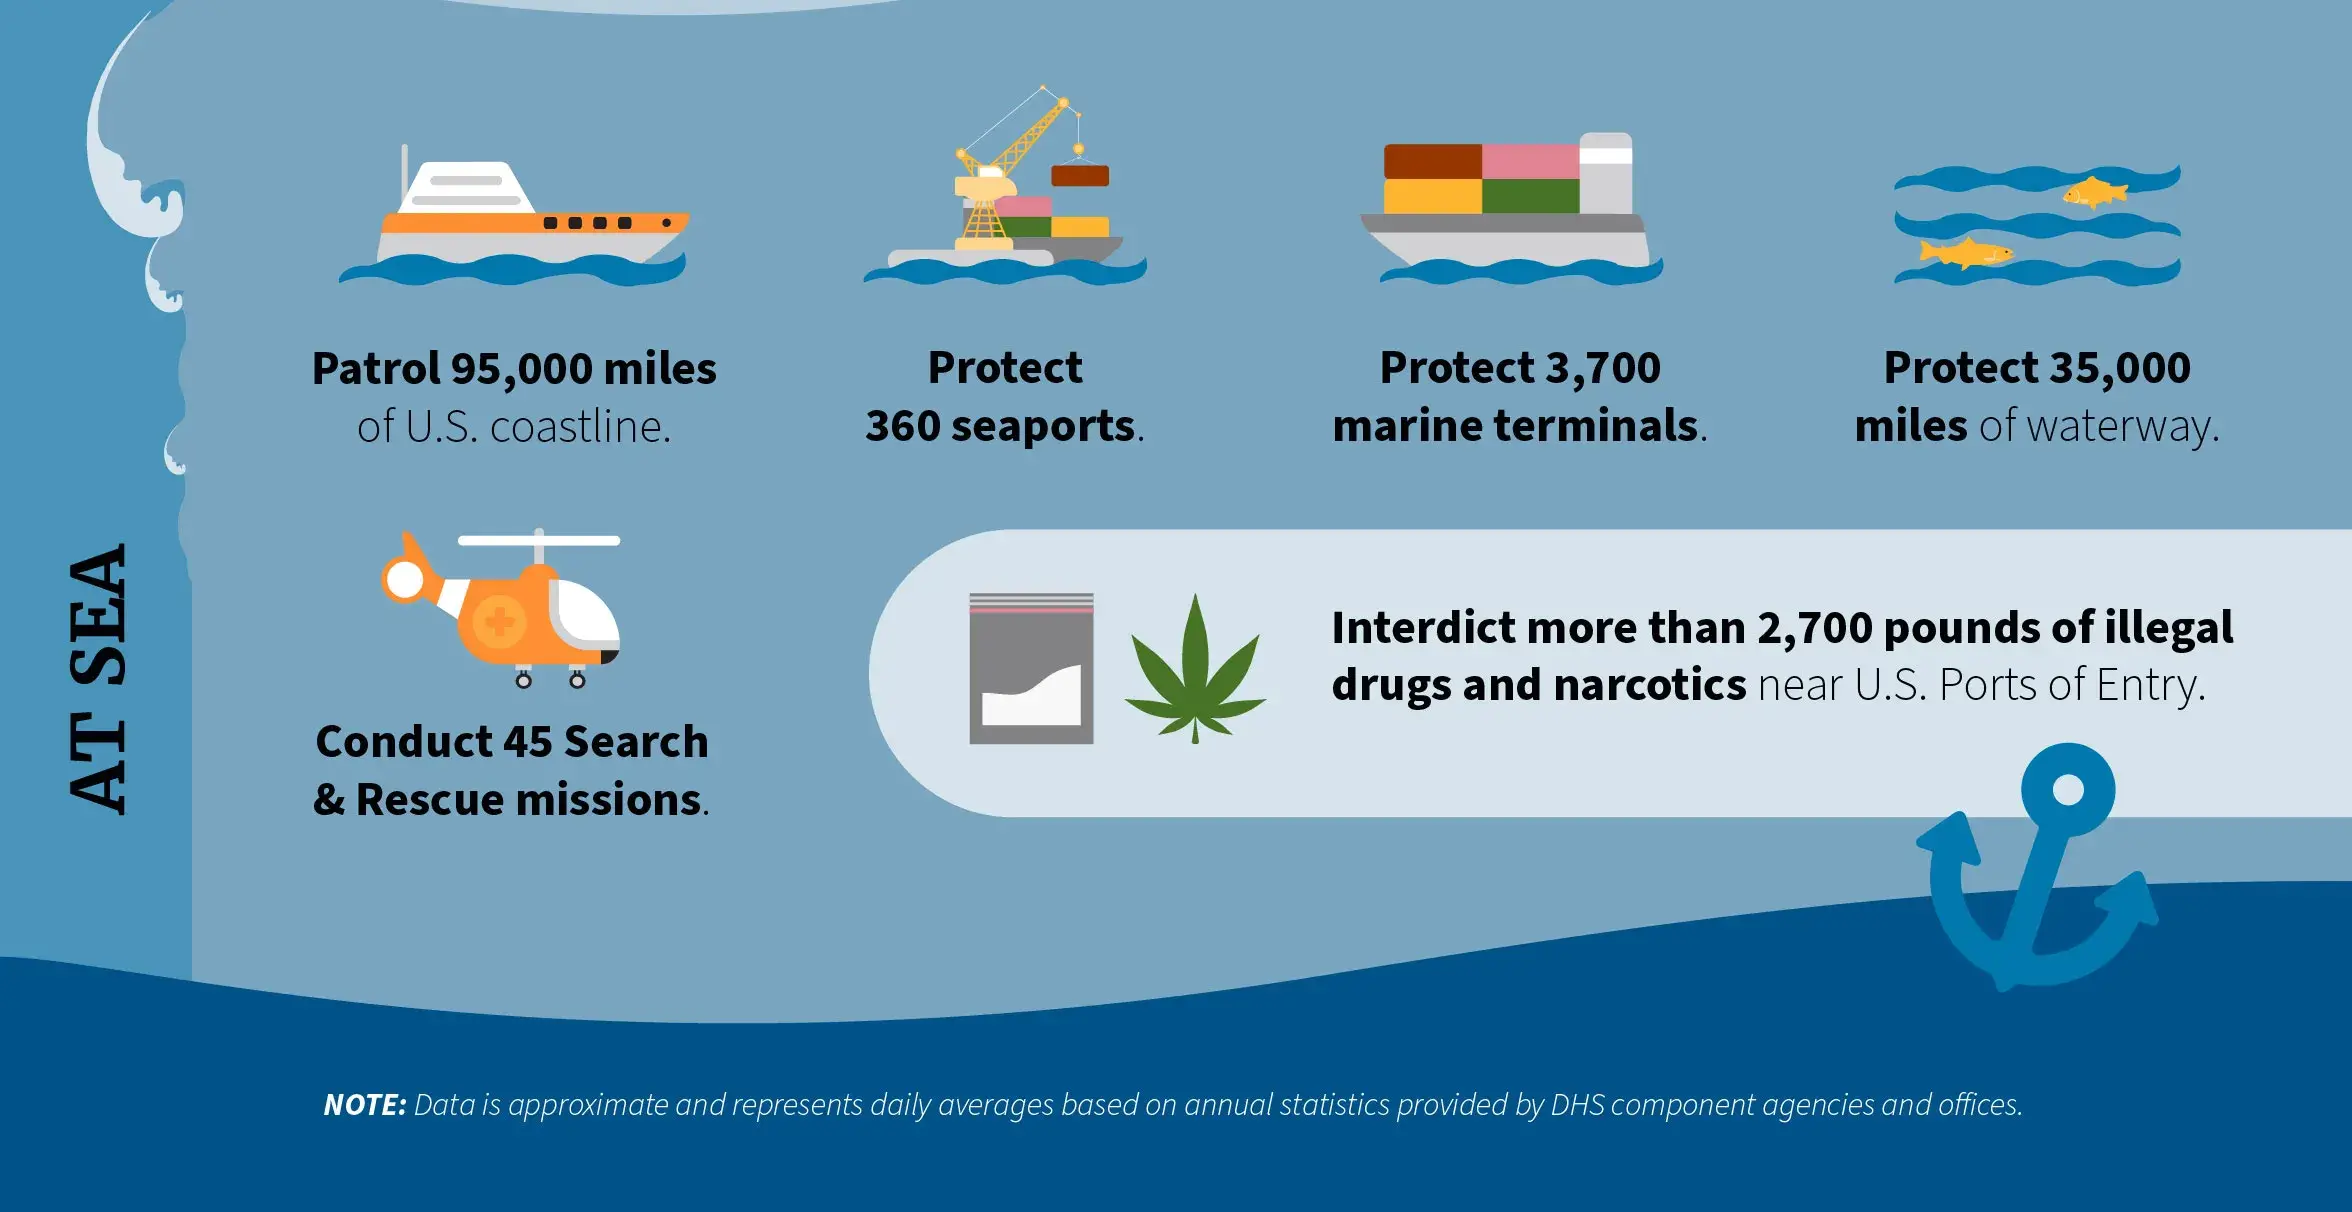 At Sea: Patrol 95,000 miles of U.S. coastline. Protect 360 seaports. Protect 3,700 marine terminals. Protect 35,000 miles of waterway. Conduct 45 search & rescue missions. Interdict more than 2,700 pounds of illegal drugs and narcotics near U.S. Ports of Entry. Note: Data is approximate and represents daily averages based on annual statistics provided by DHS component agencies and offices.